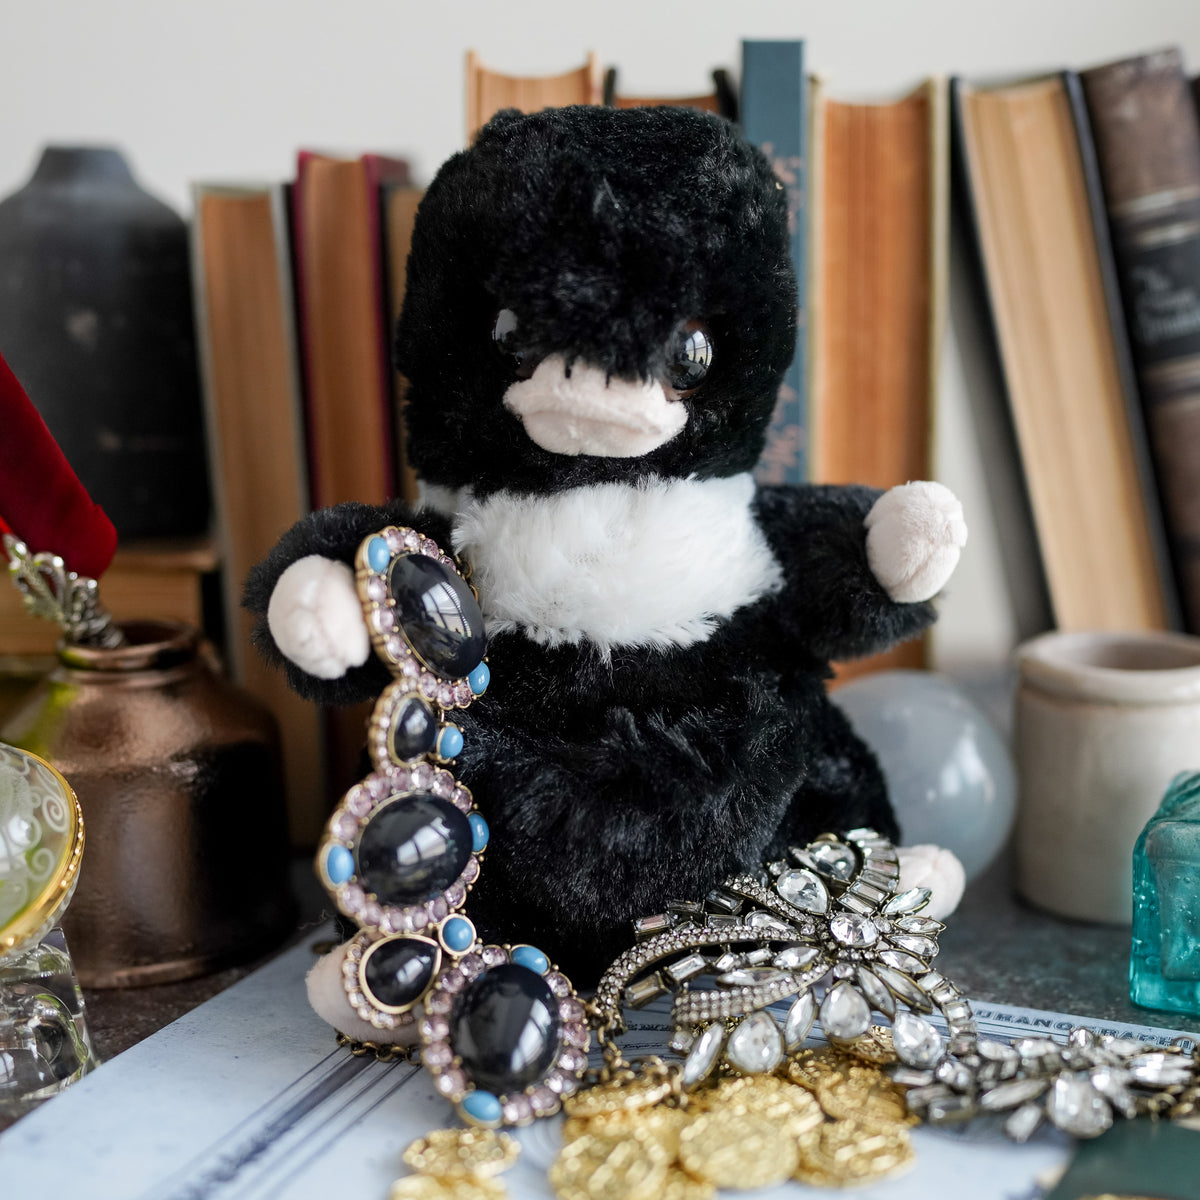 Thief Plush with jewels around it in front of a stack of books